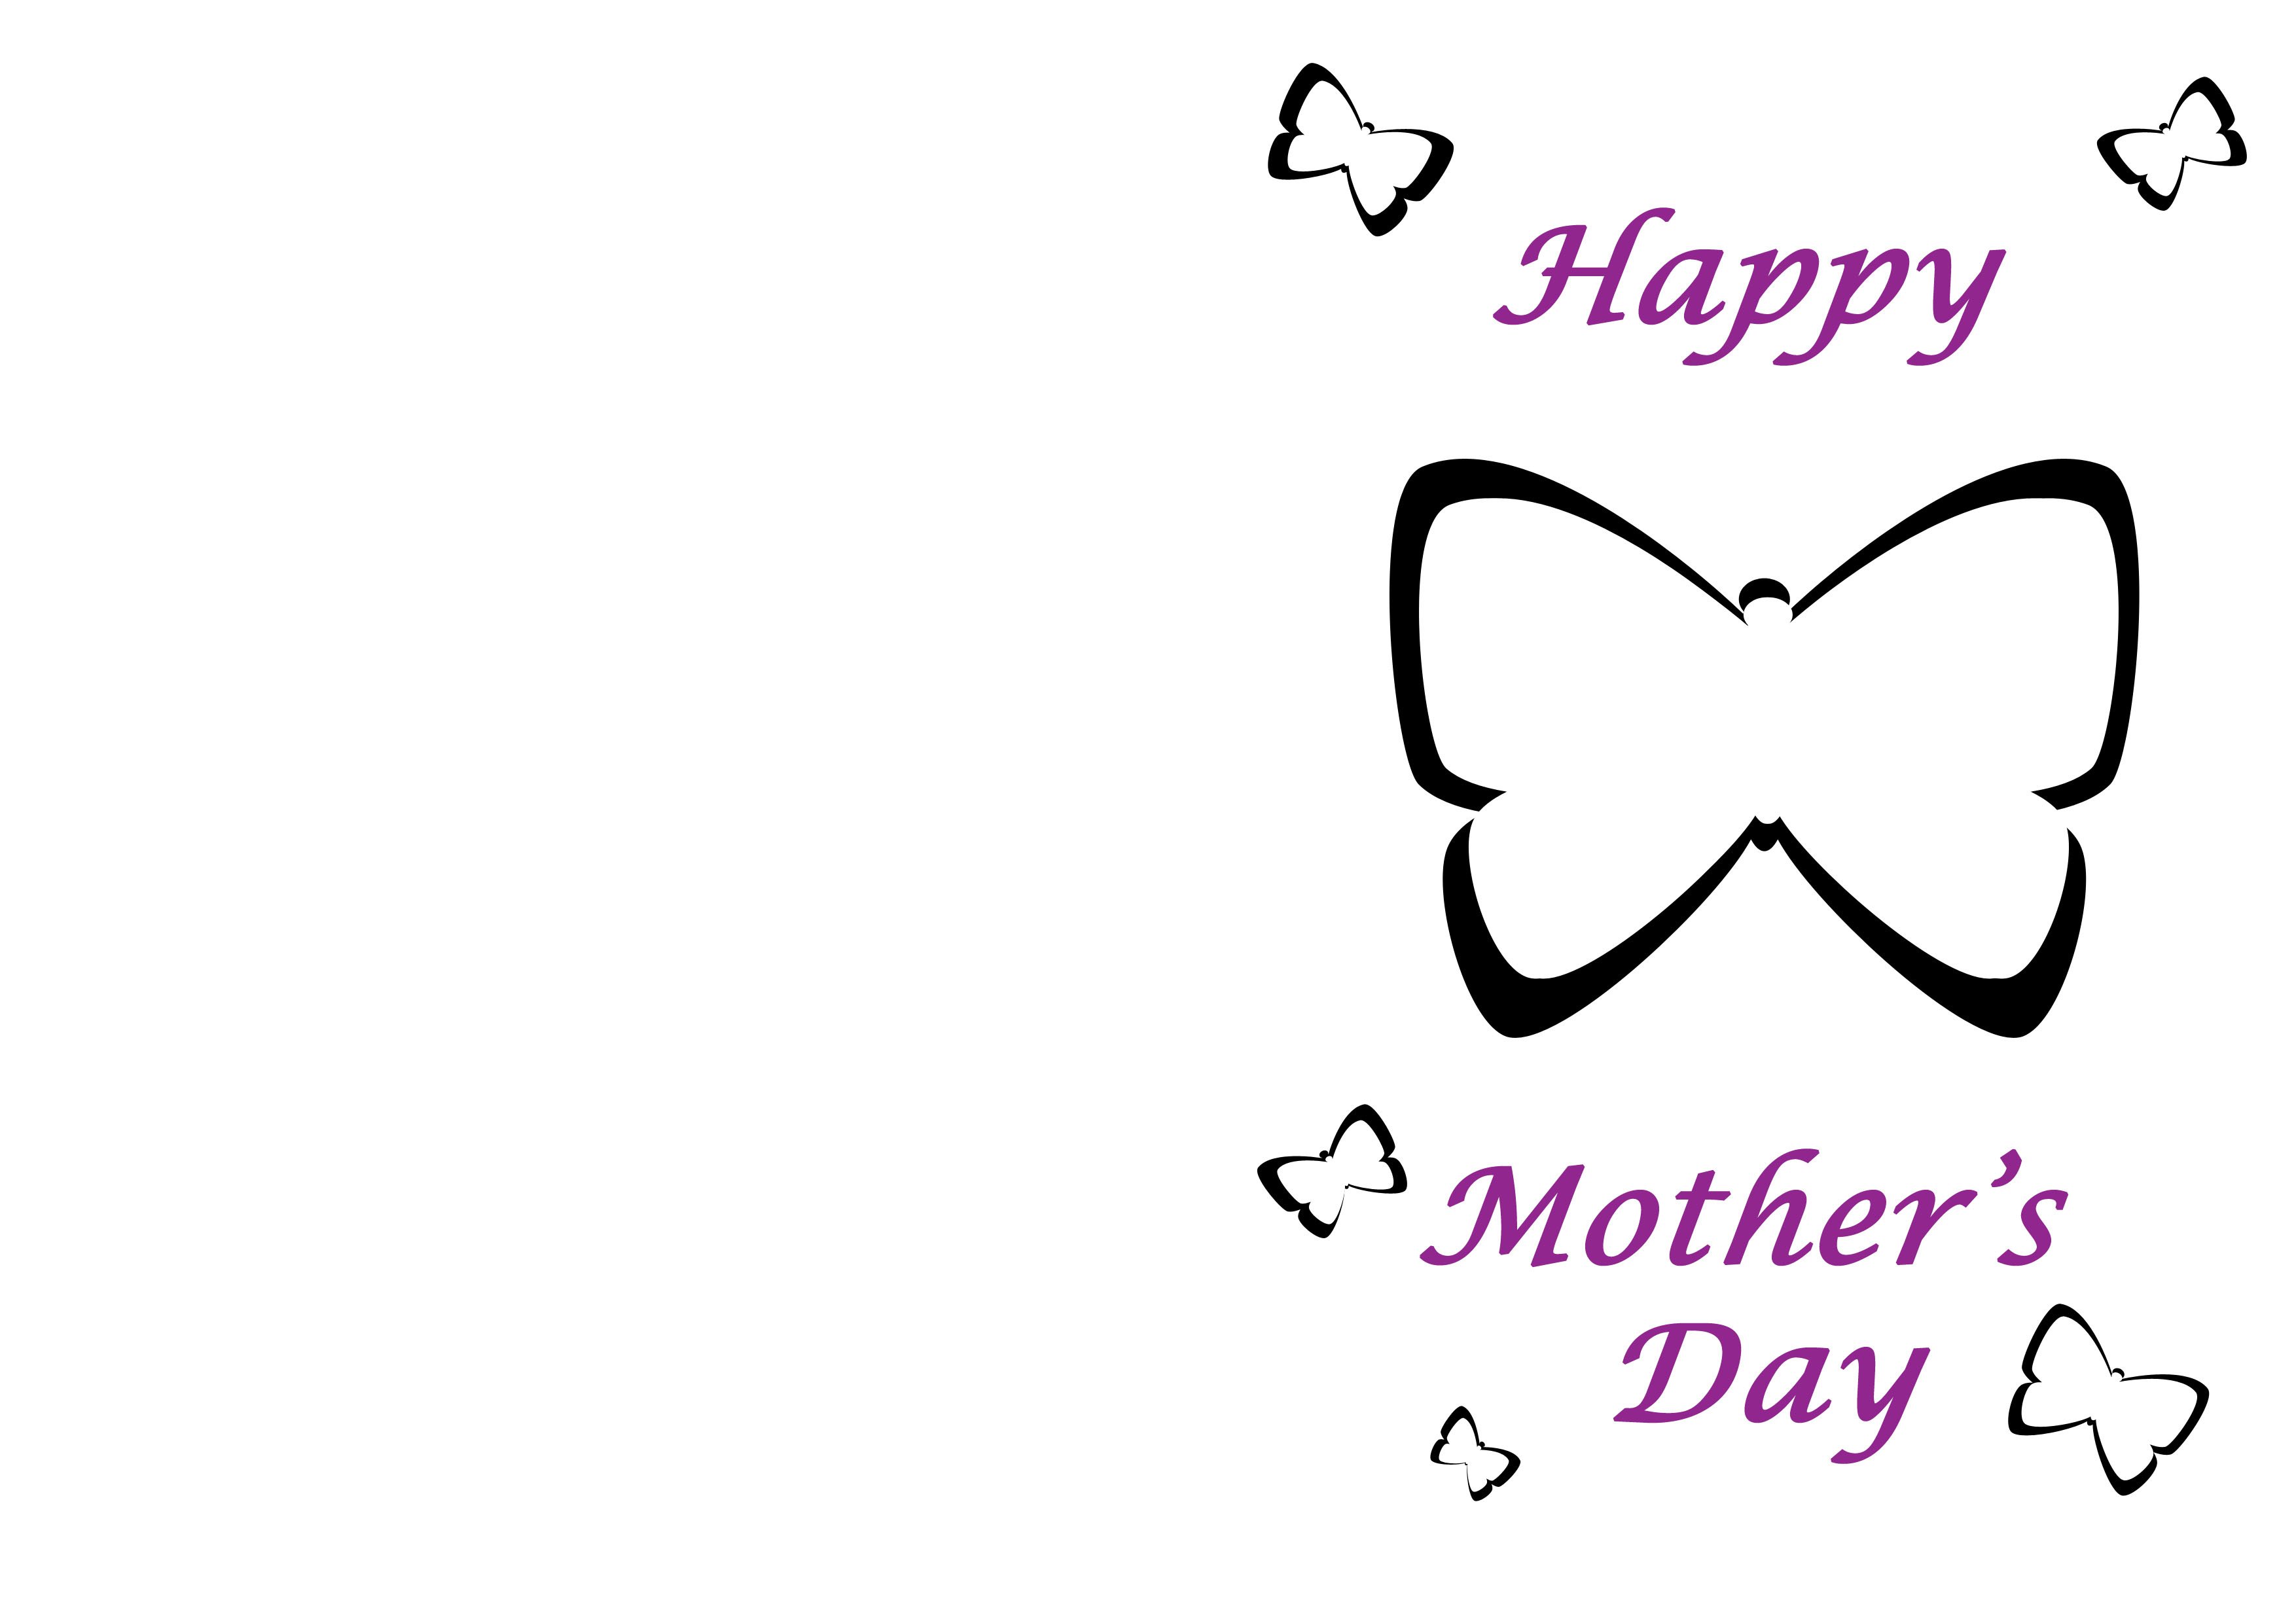 mothers-day-mom-mother-family-1mday-mood-love-holiday